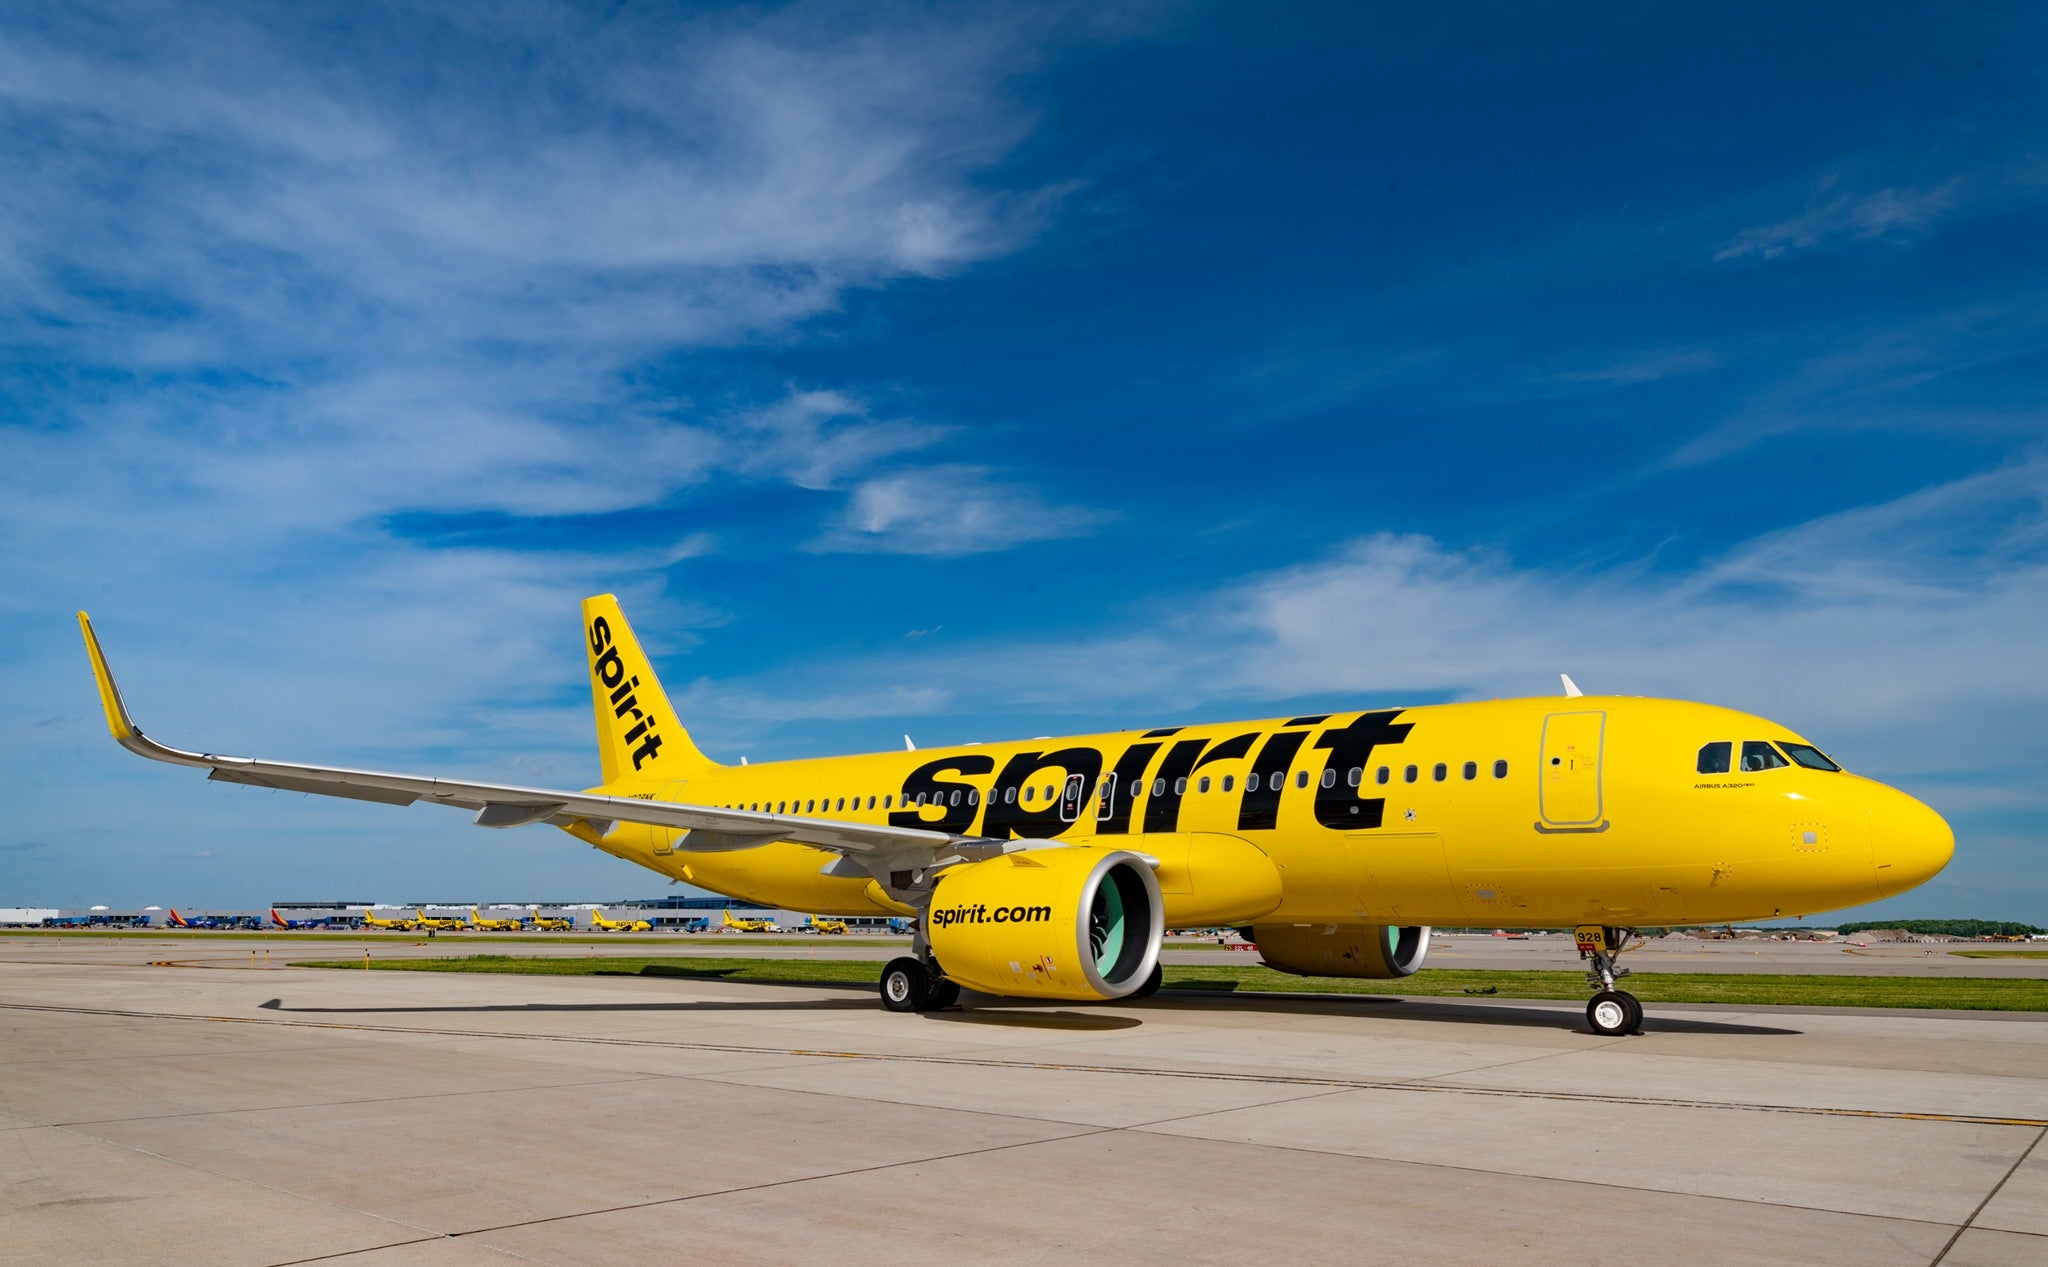 Spirit Airlines aircraft on tarmac